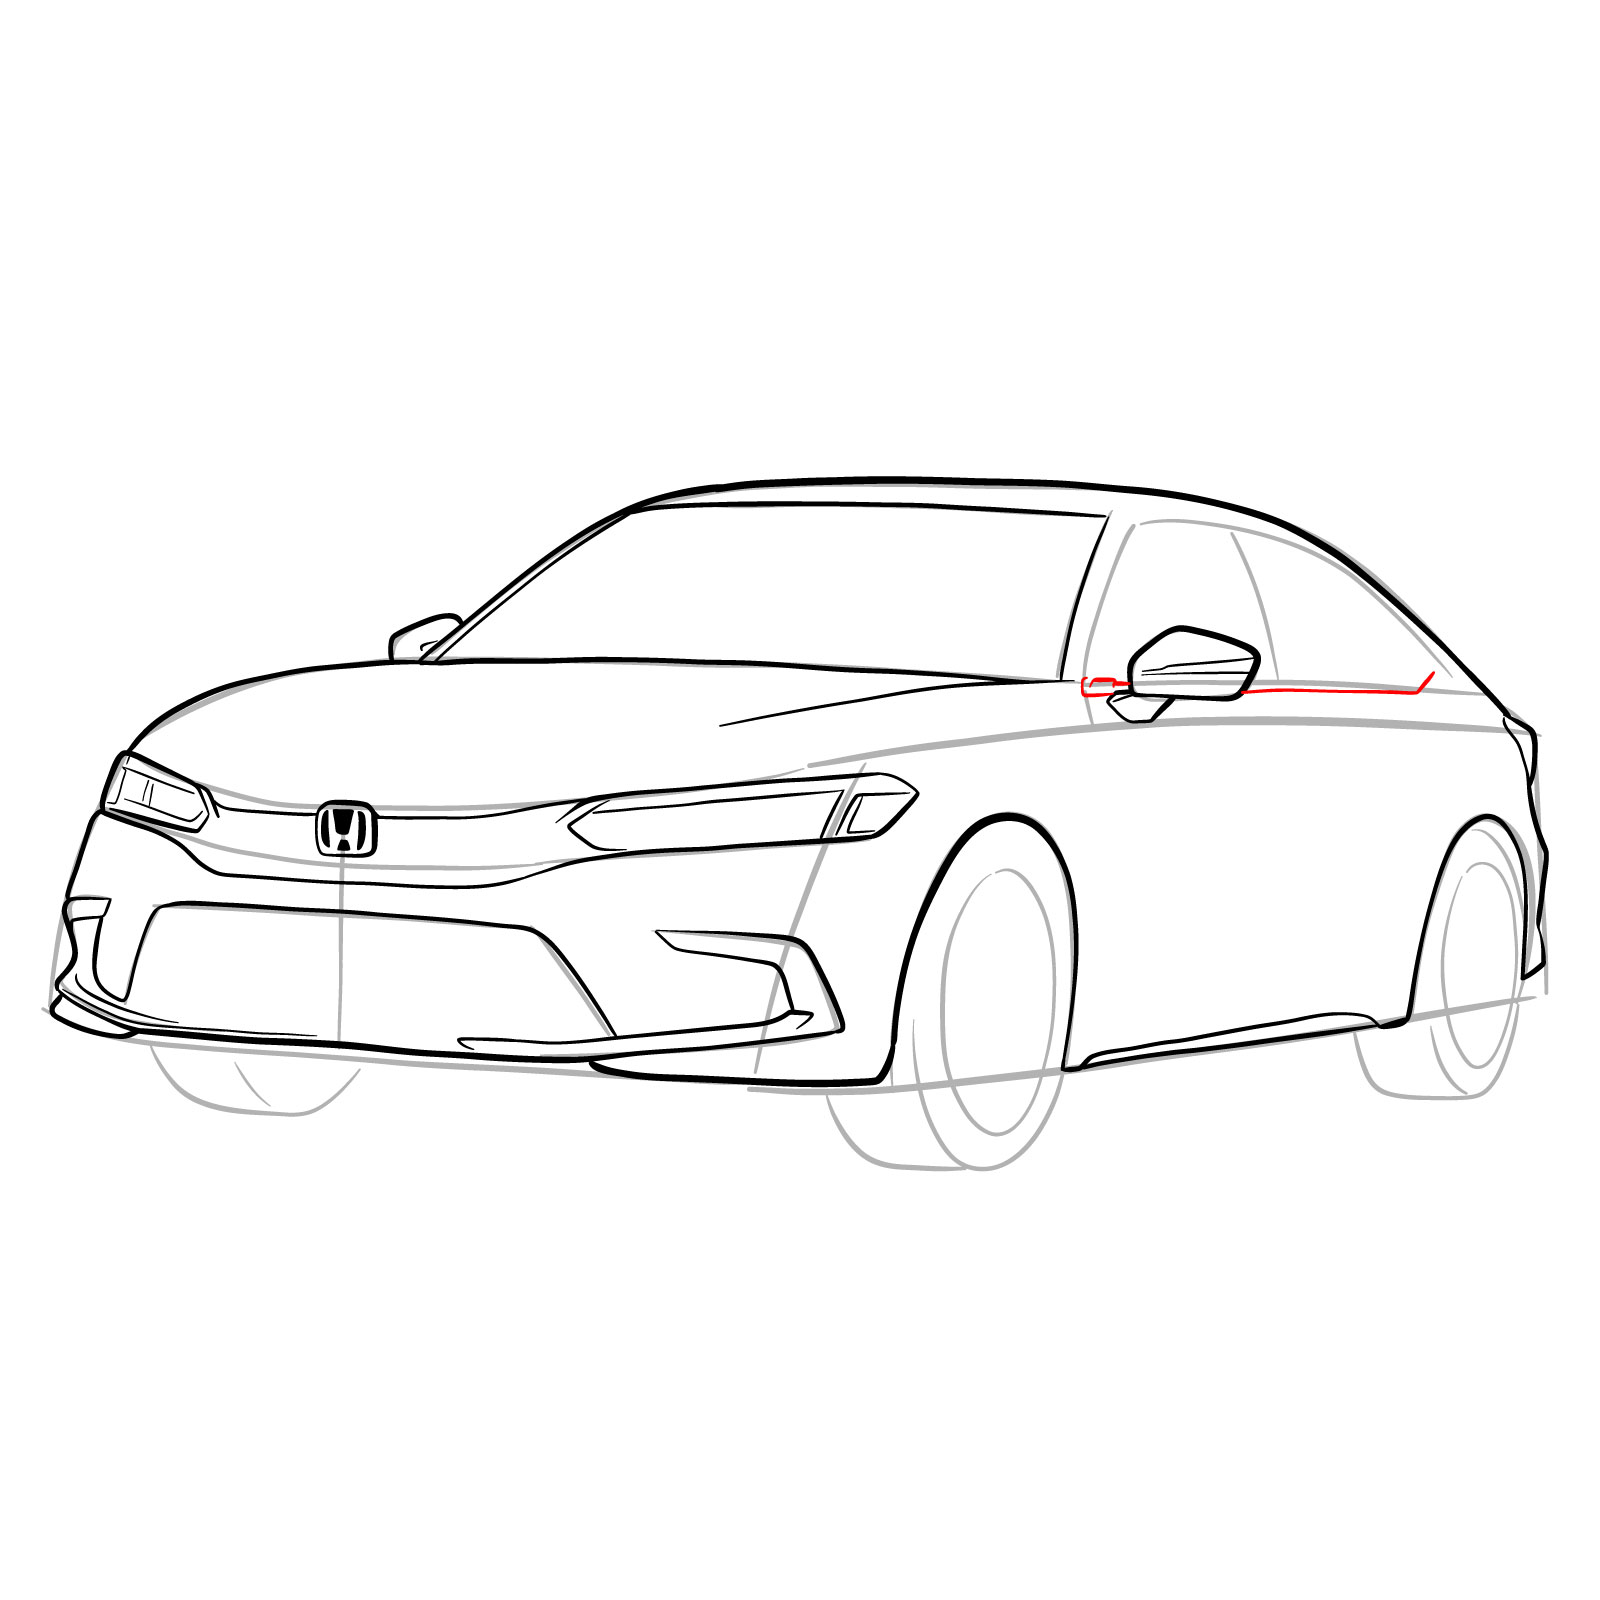 How to draw a 2022 Honda Civic - step 20